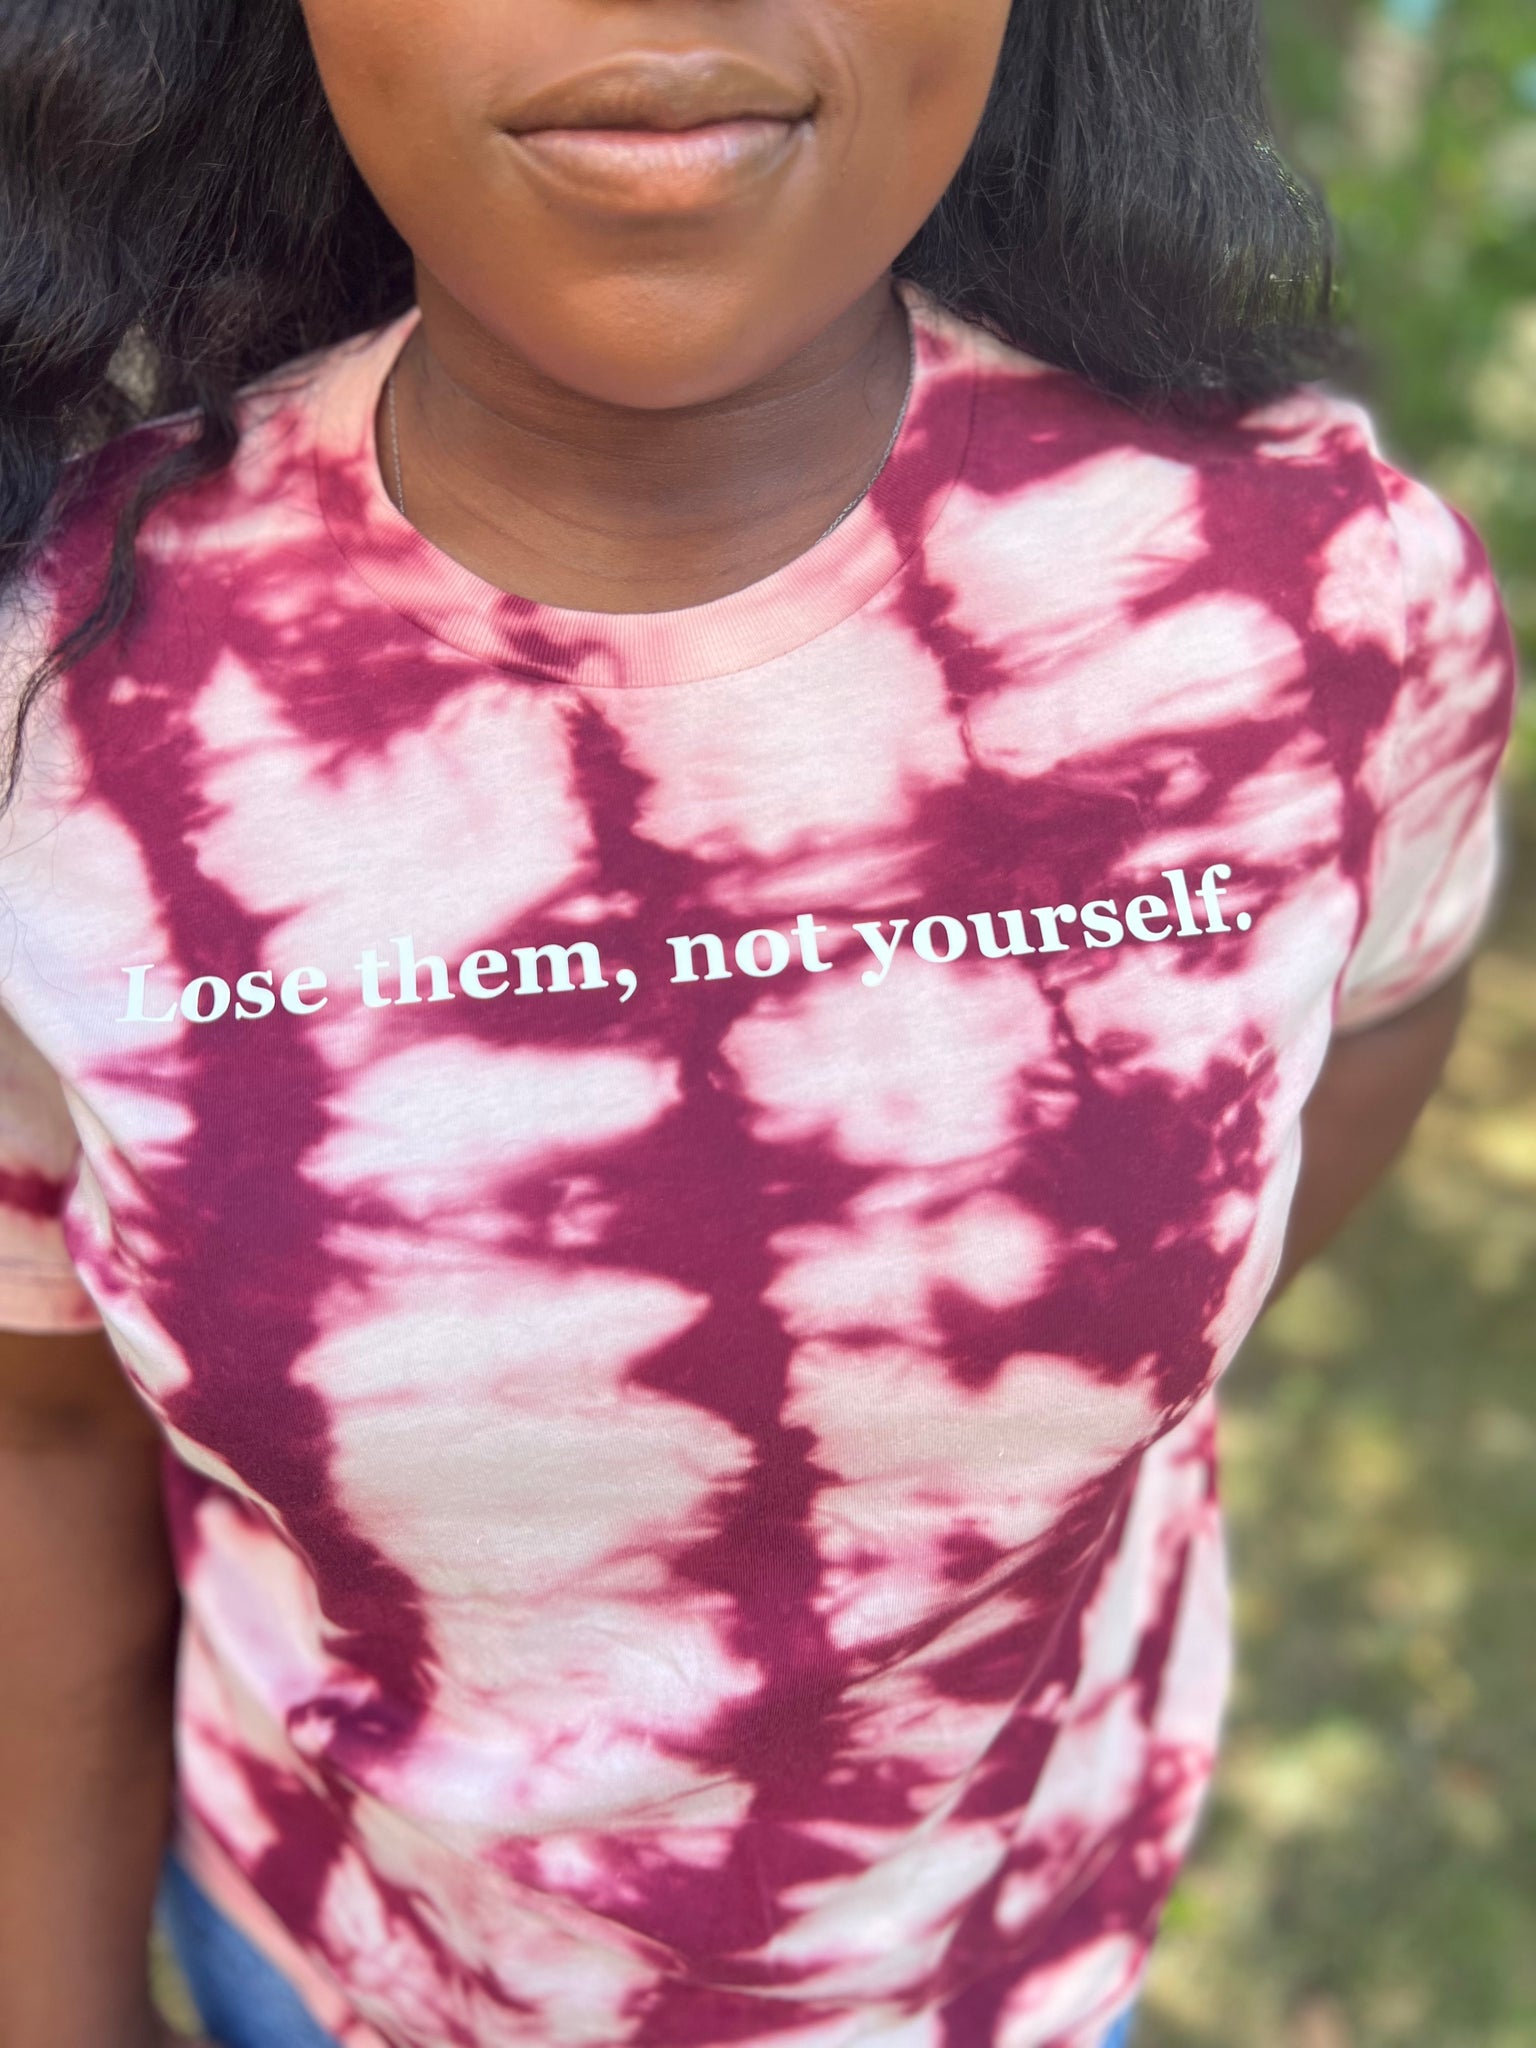 Lose them, not yourself. - Unisex Tee